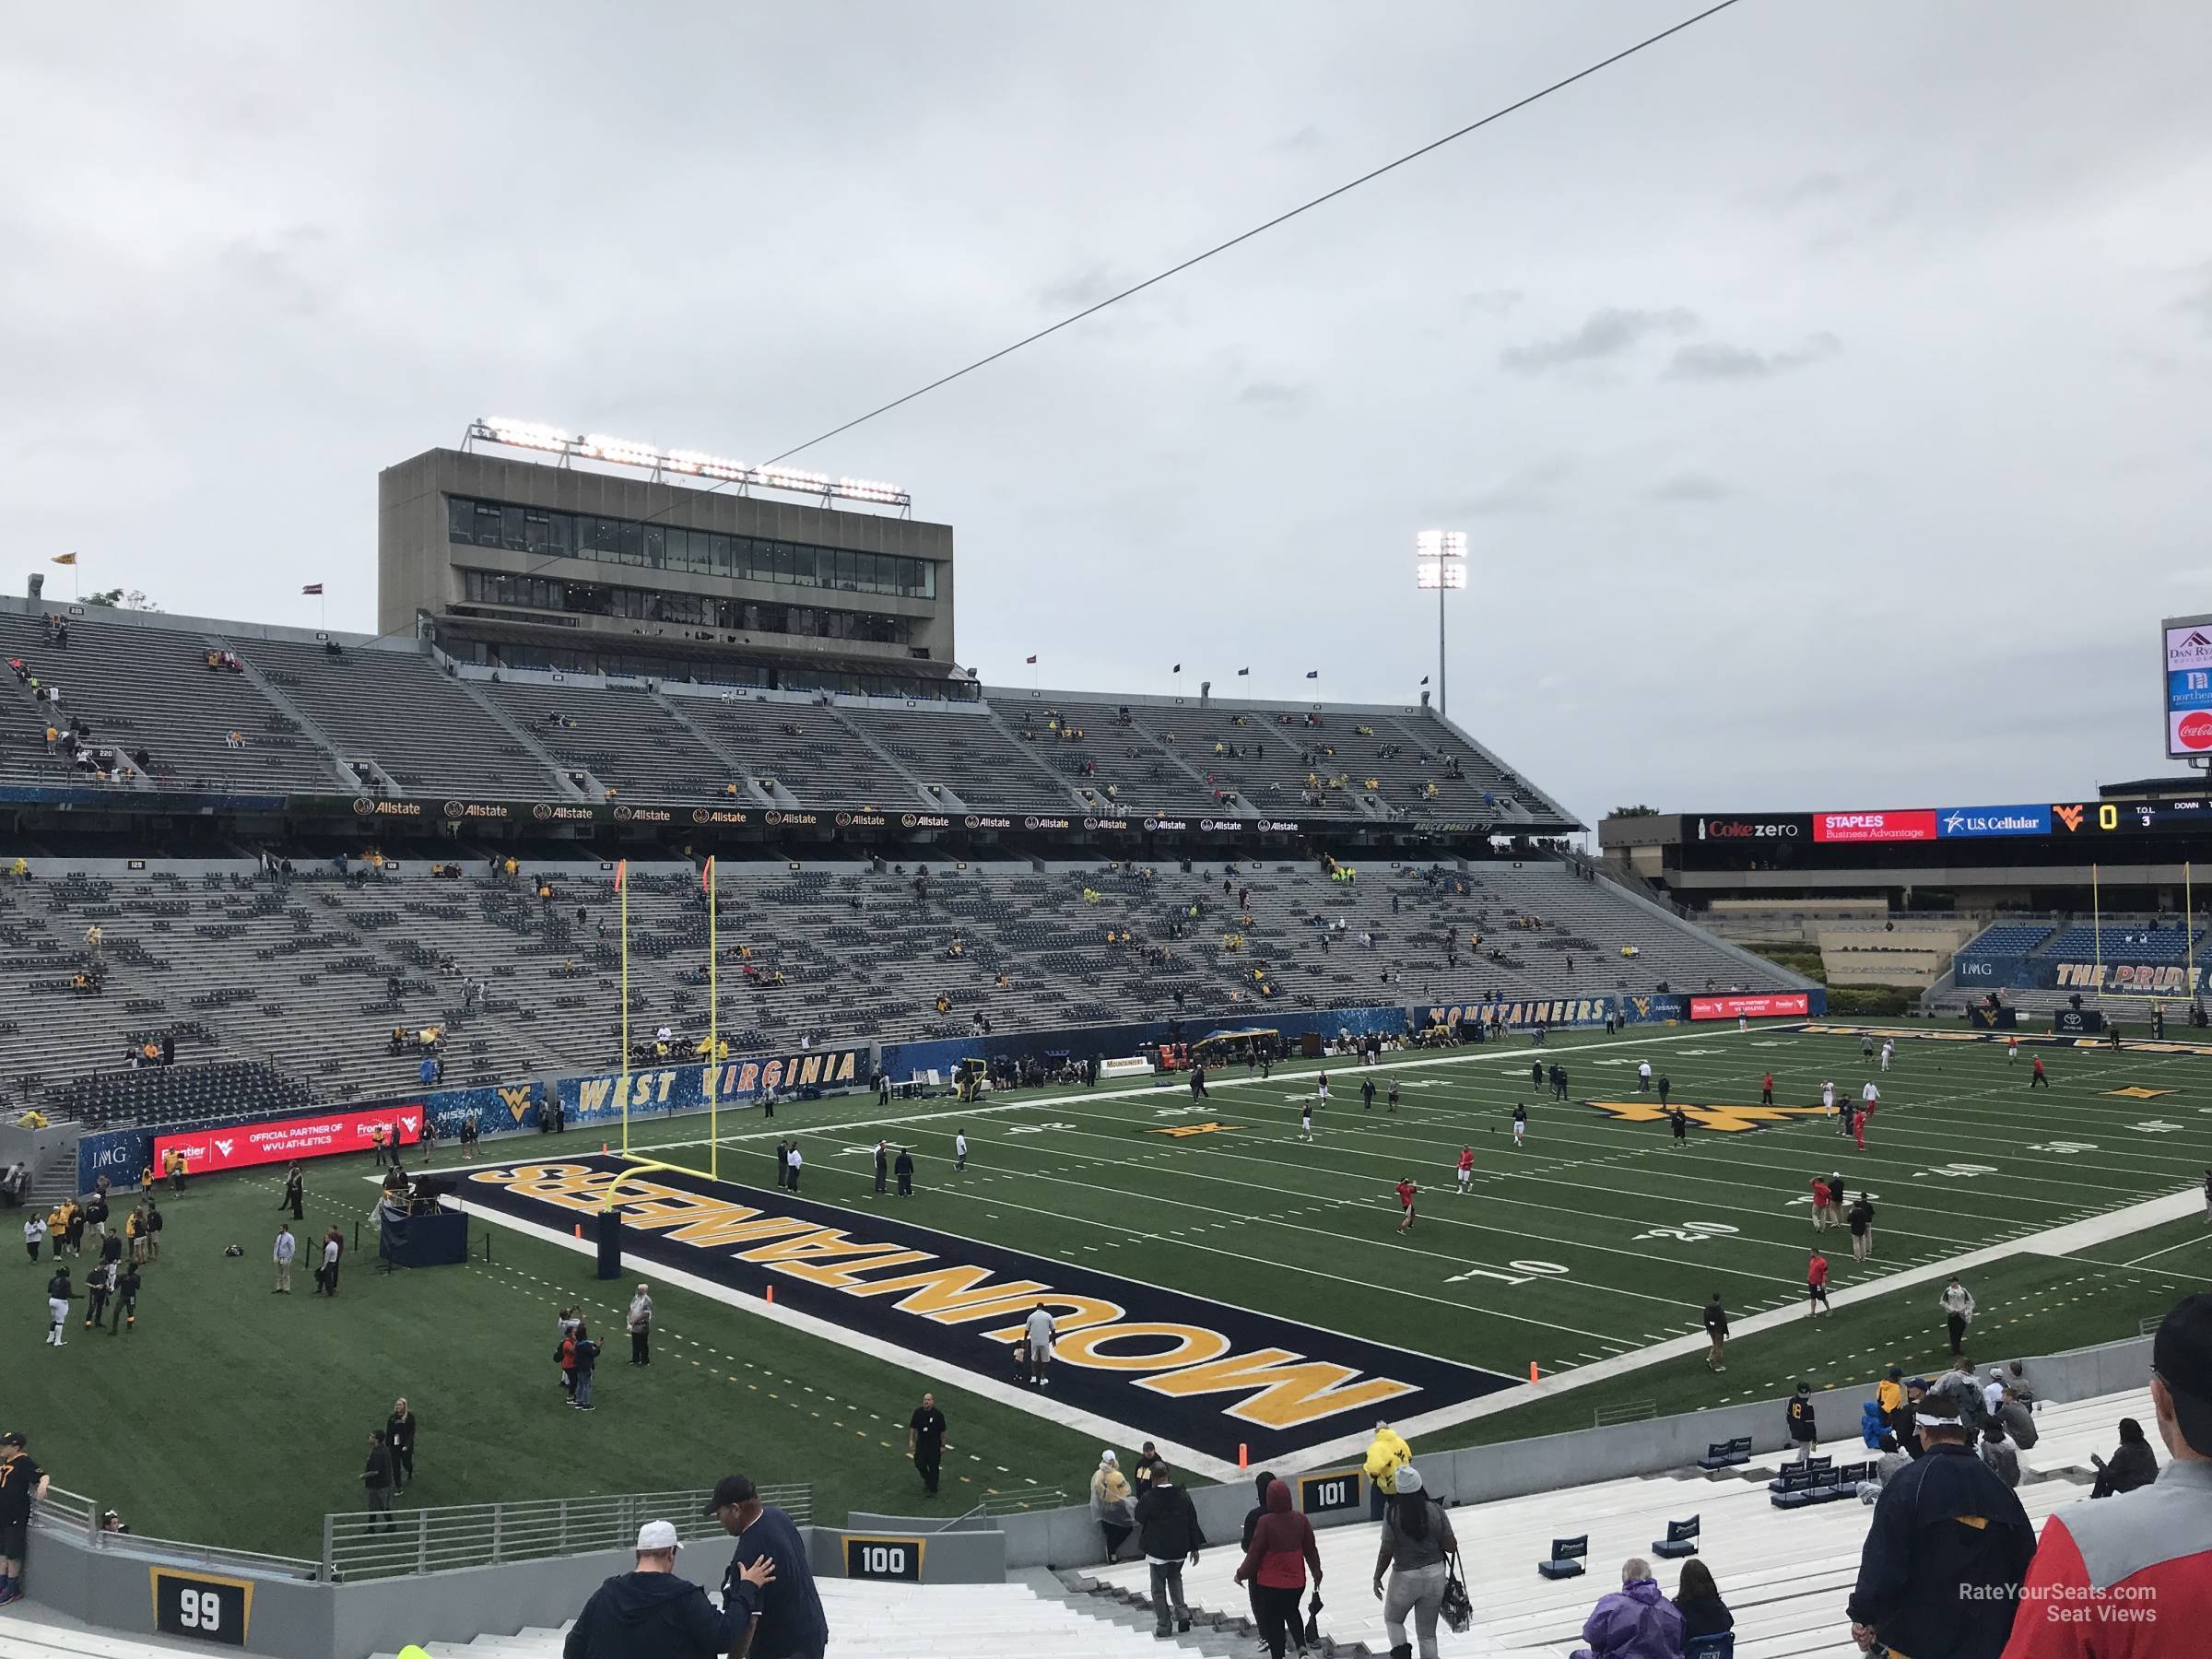 Section 100 at Mountaineer Field - RateYourSeats.com